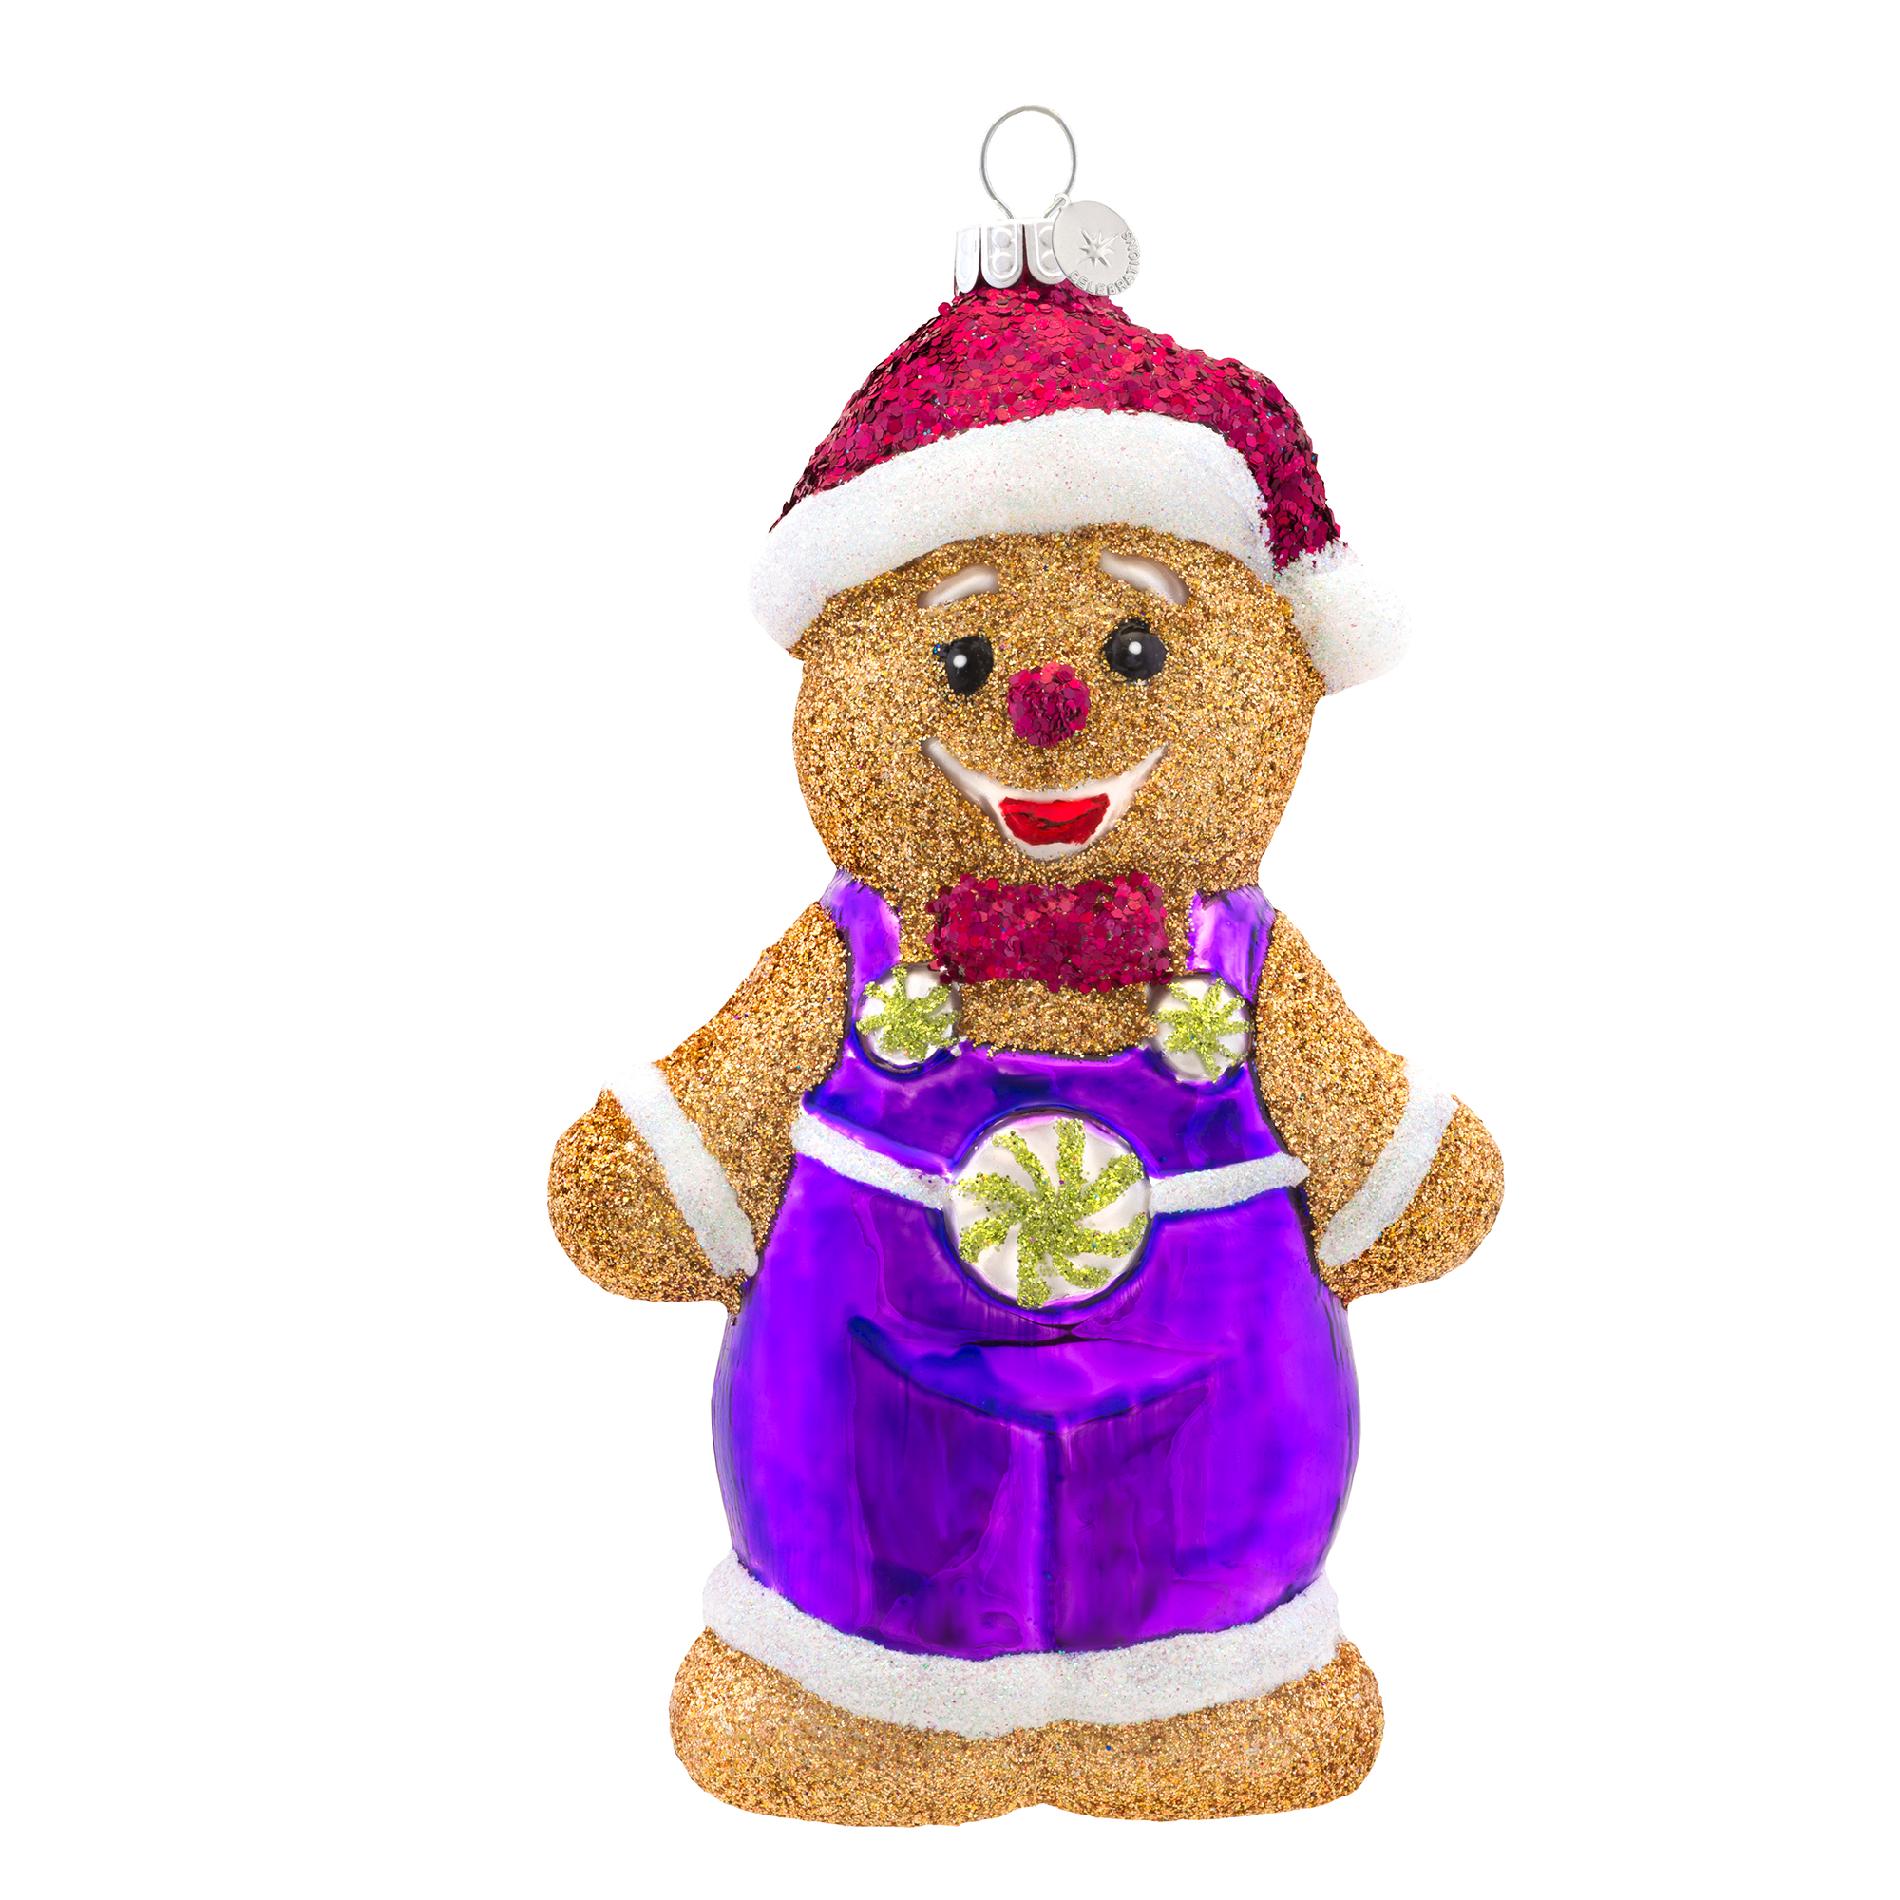 Celebrations by Radko &#174; - Whimsical Gingerbread Man, 5 in